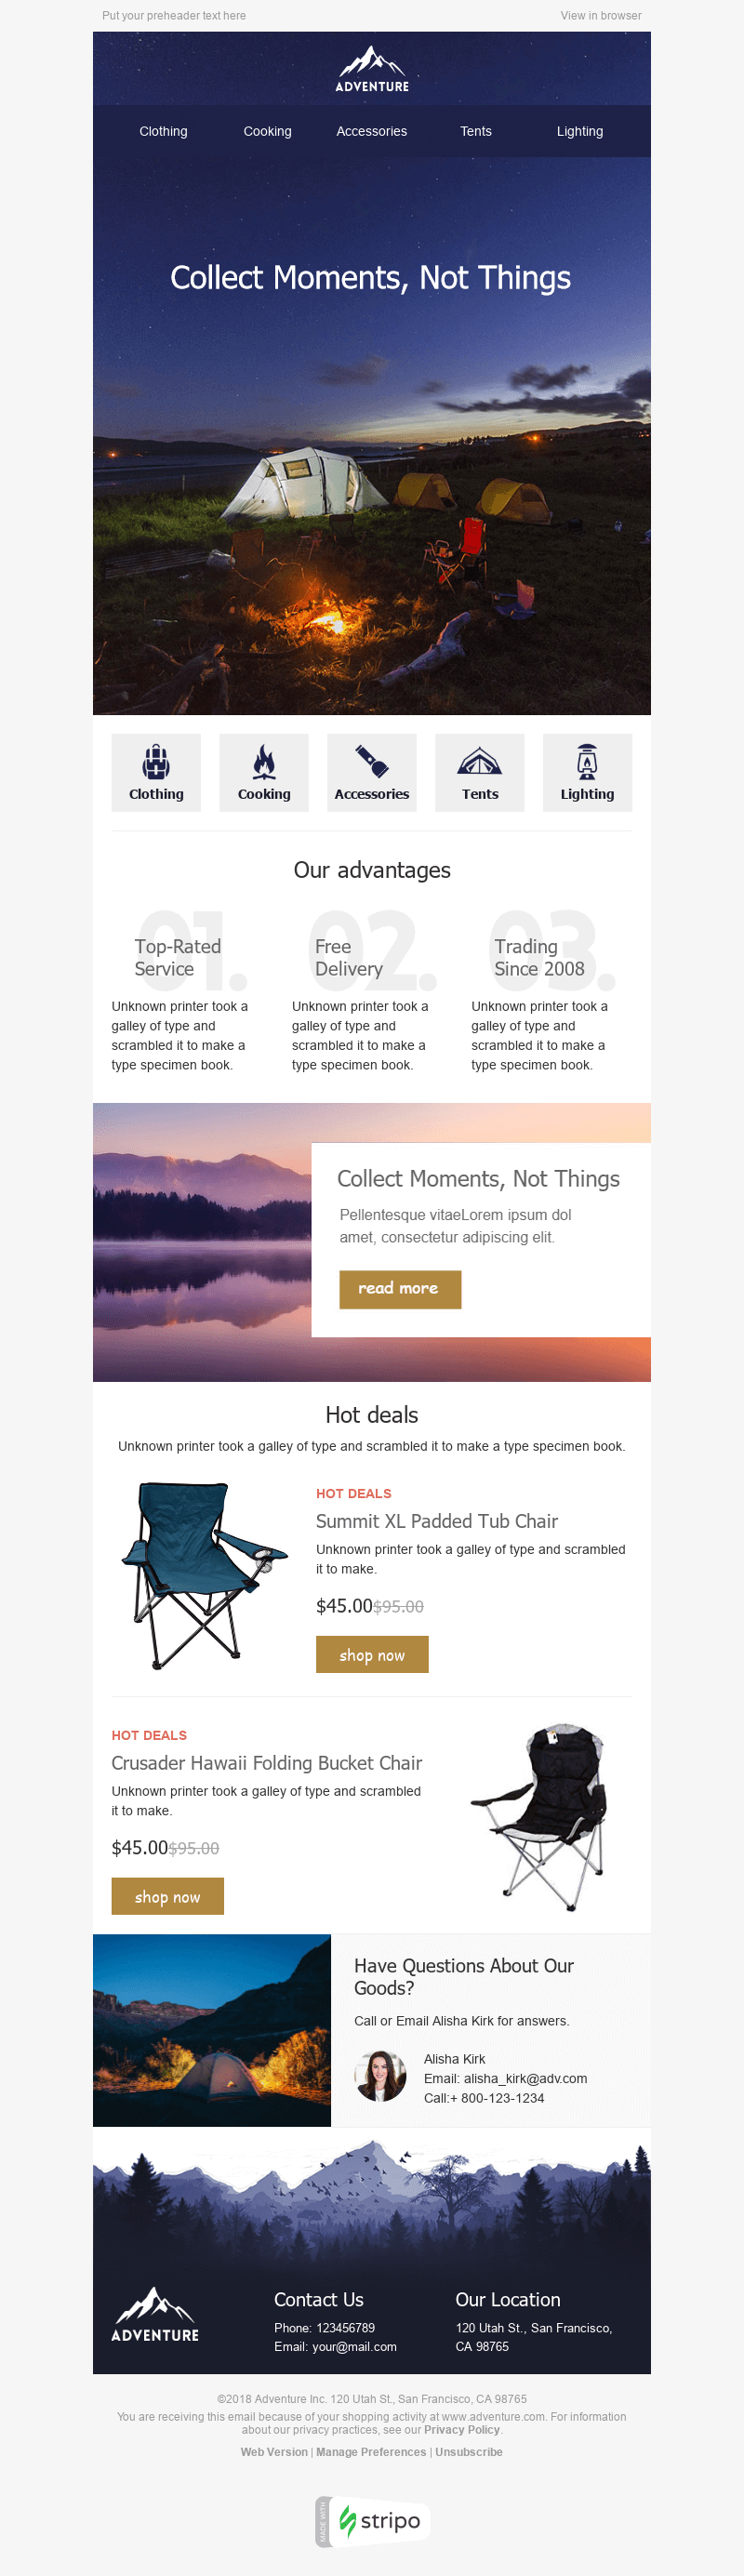 hospitality and travel email newsletter templates